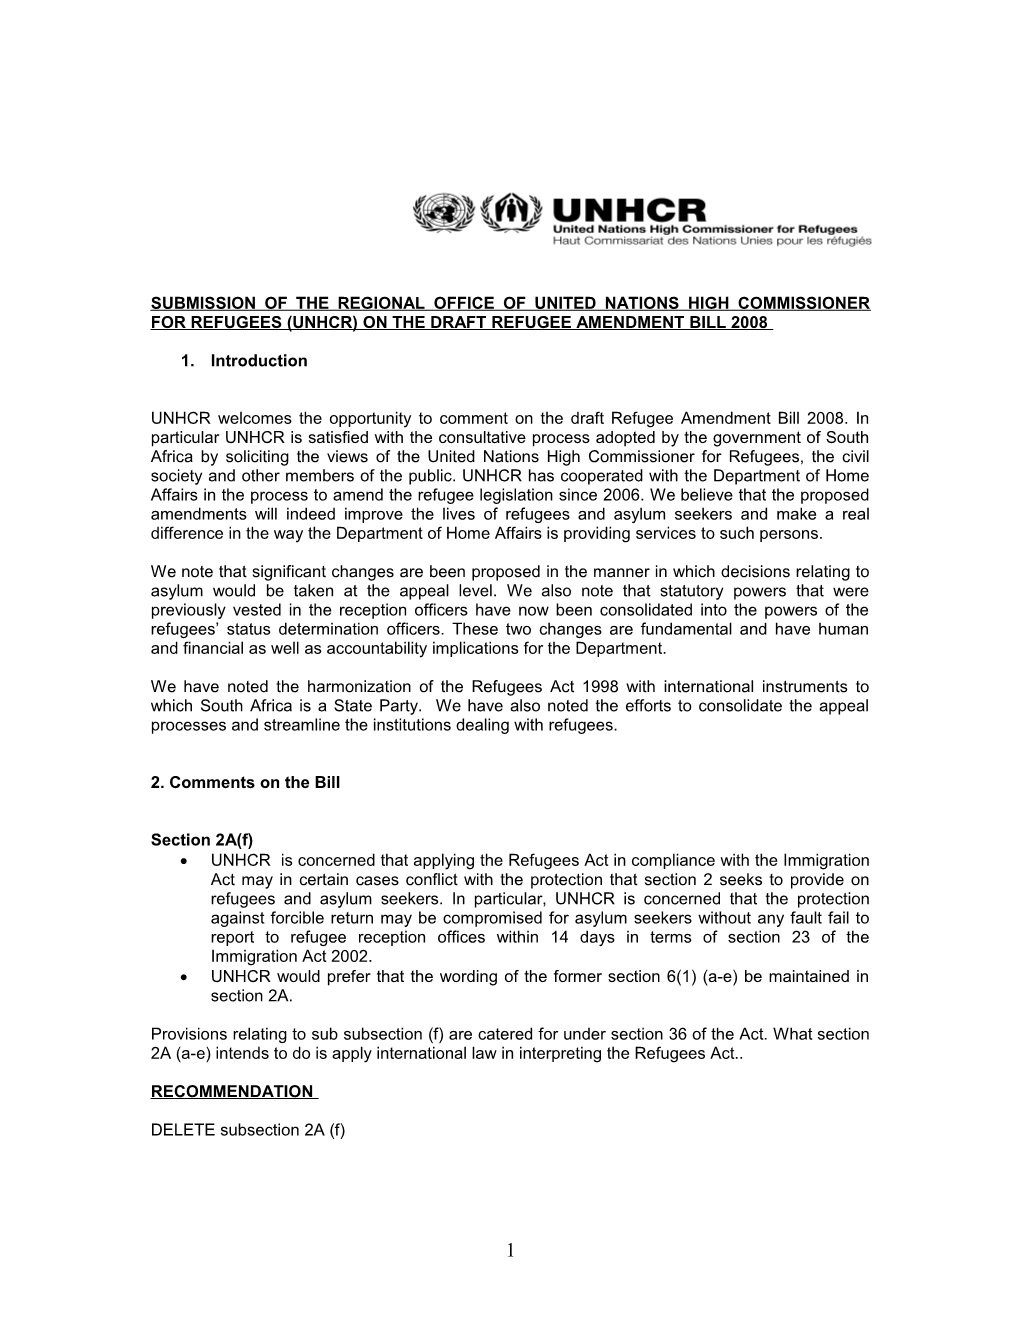 Submission of the Regional Office of United Nations High Commissioner for Refugees (Unhcr)